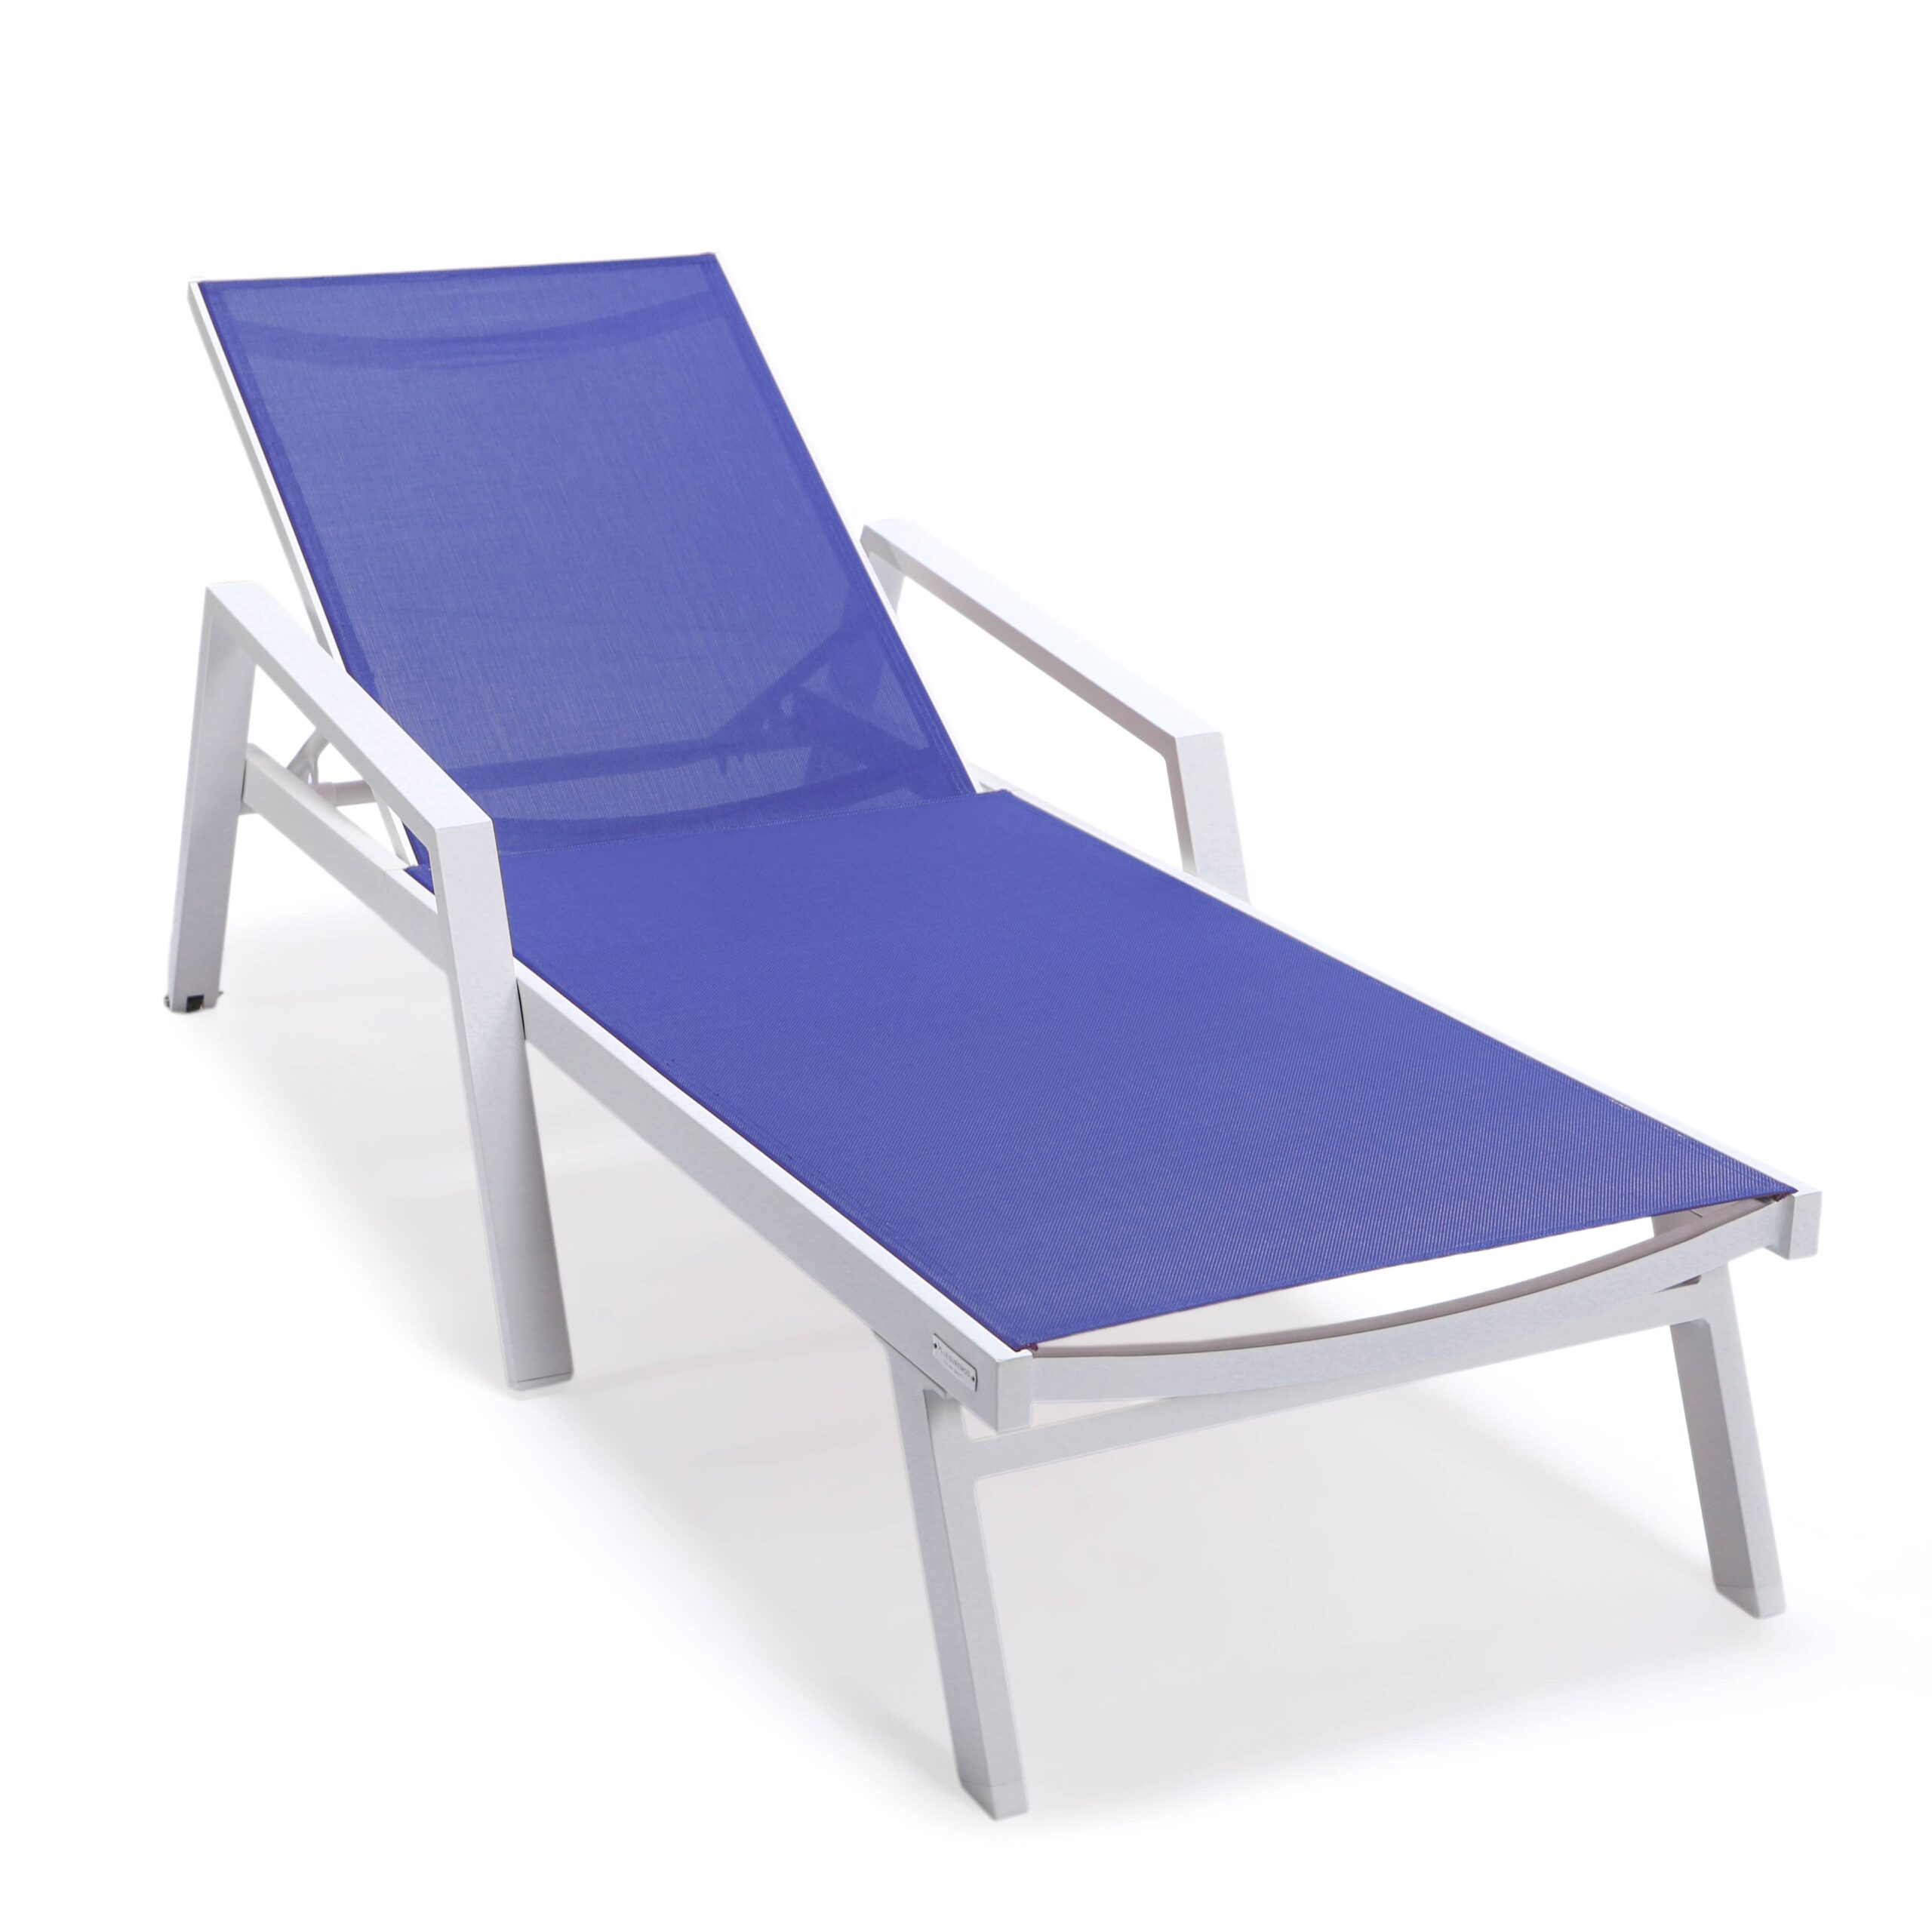 LeisureMod Marlin Patio Chaise Lounge Chair with Armrests Poolside Outdoor Chaise Lounge Chair for Patio Lawn & Garden Modern White Aluminum Suntan Chair with Sling Chaise Lounge Chair (Navy Blue) - image 1 of 12